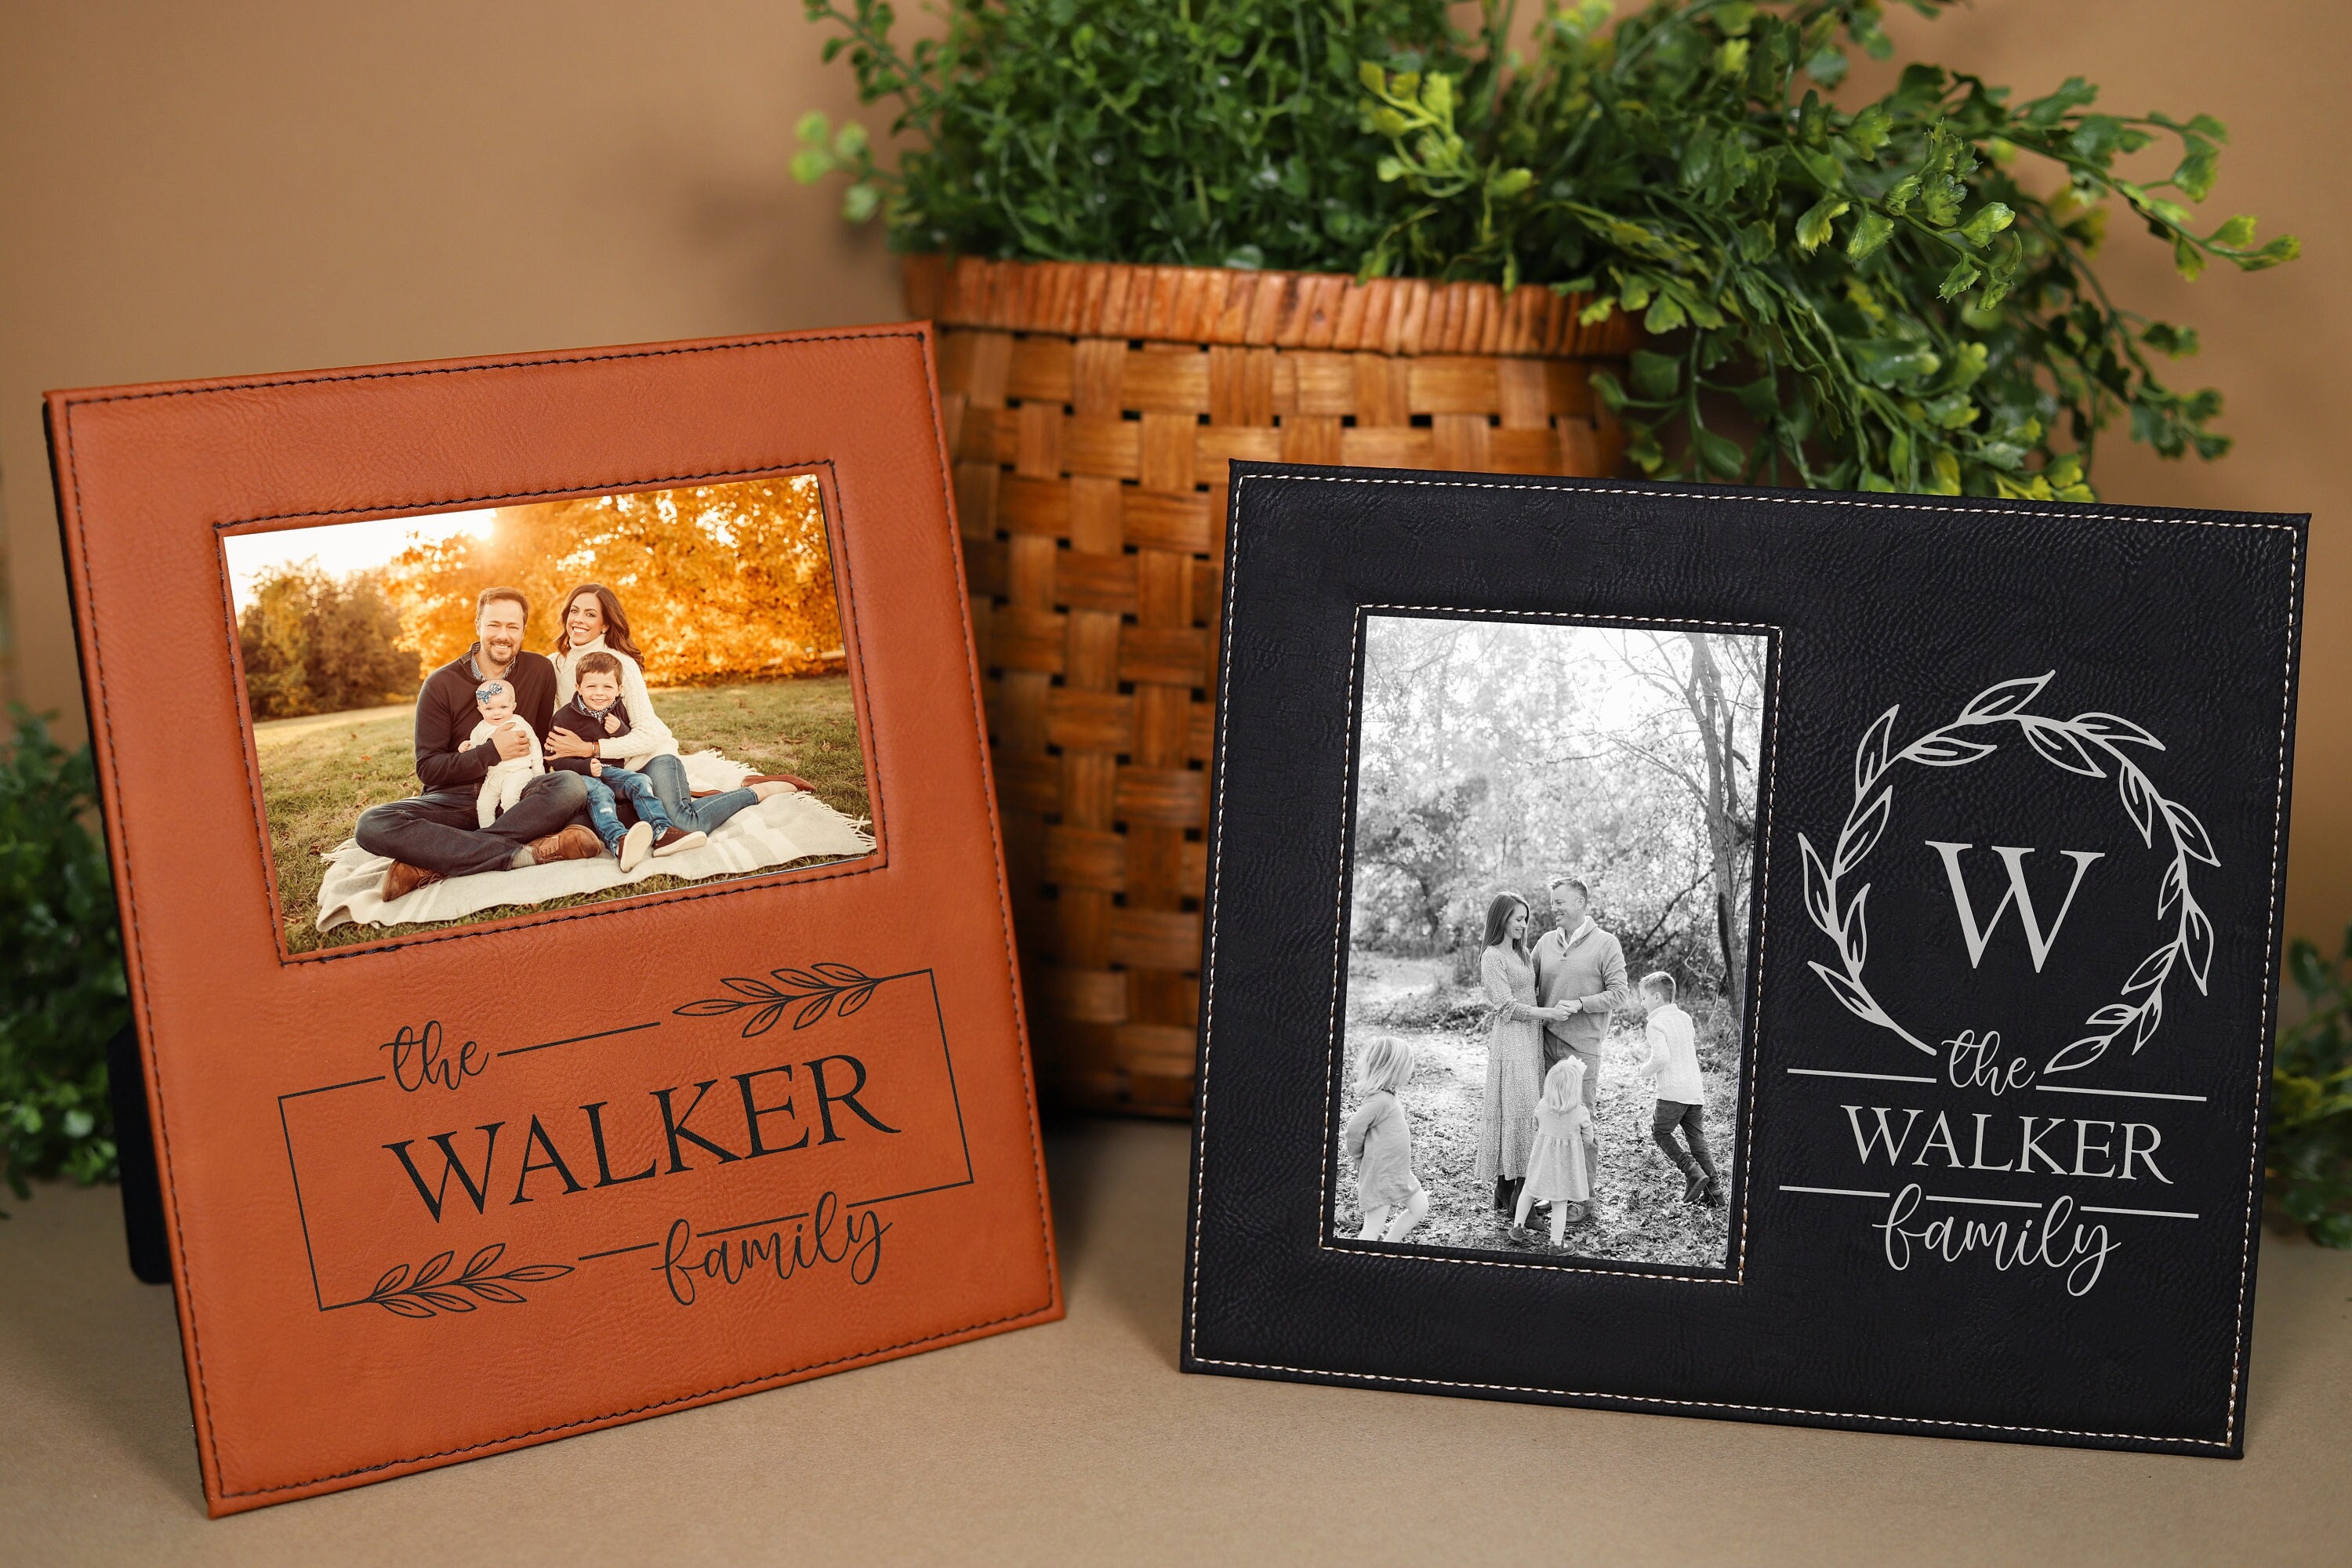 Wholesale CREATCABIN 4 x 6 Wood Picture Frame Engraved Photo Frames Display  Wooden Tabletop Postcard Frame For Wall Gallery Birthday Graduation Gifts  Friends Christmas Home-Friends Are The Family We Choose 